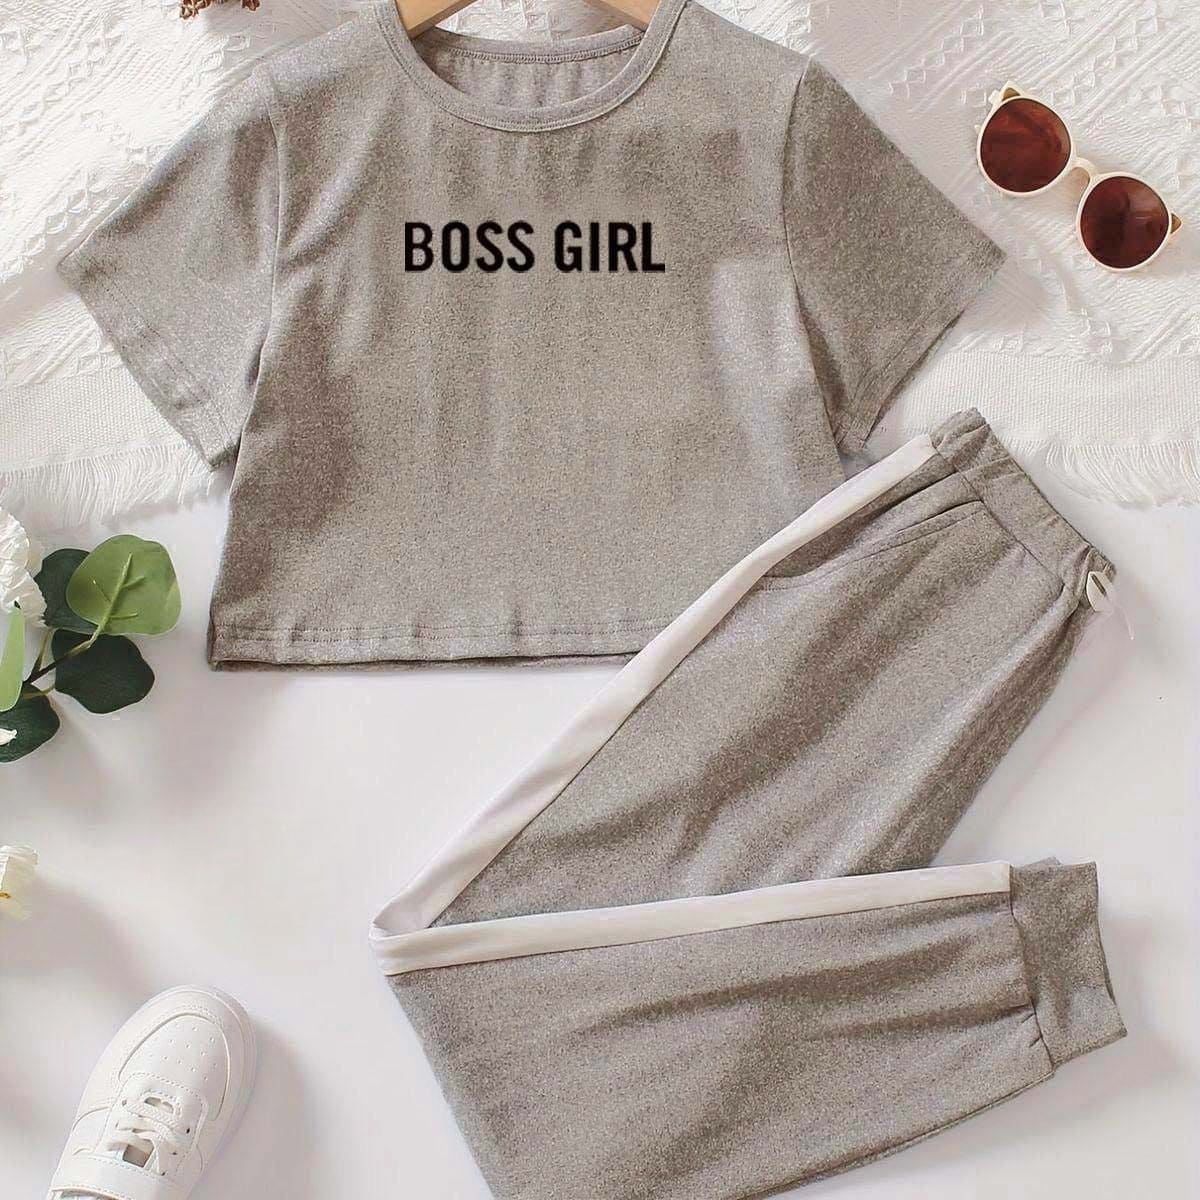 Boss Girl Crop Top Printed Track Suit, Women's Soft Sports, Comfortable Pant Sportive Track Suit